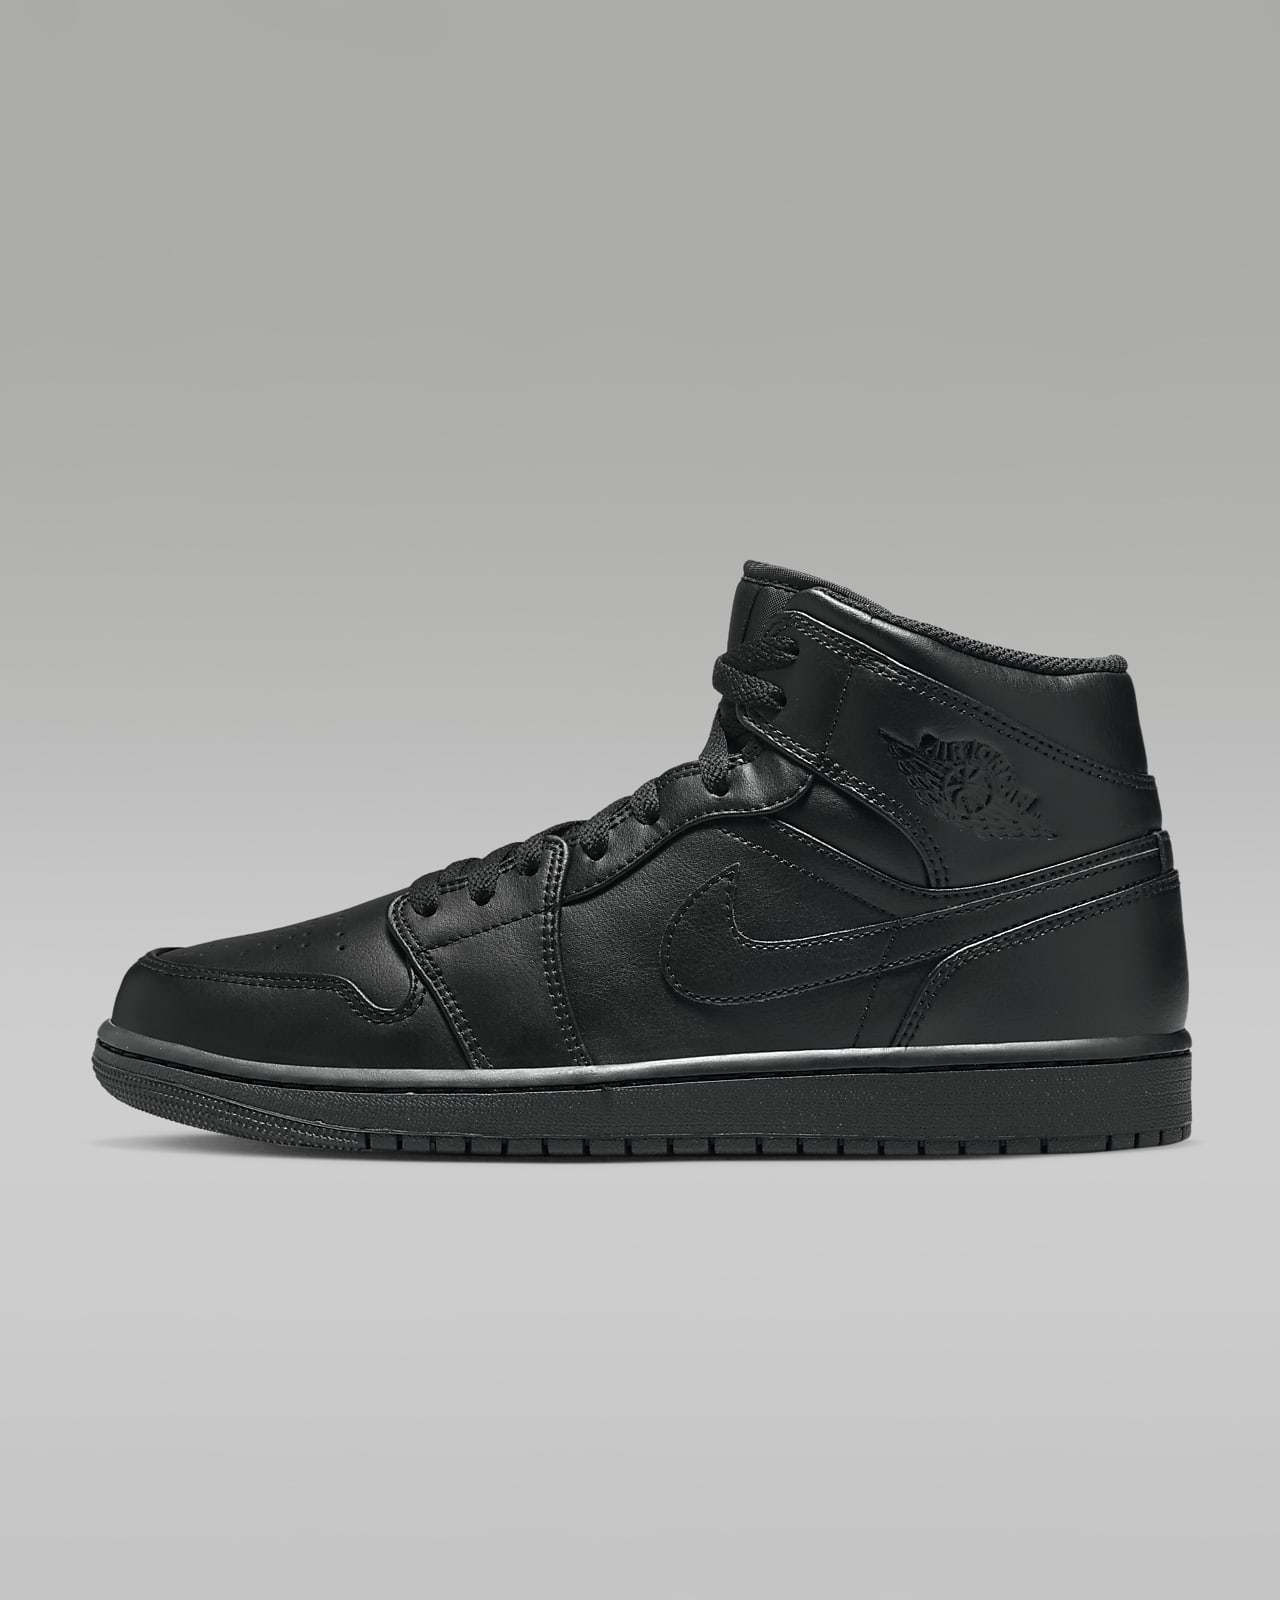 Score To give permission Ambitious Air Jordan 1 Mid Shoes. Nike.com